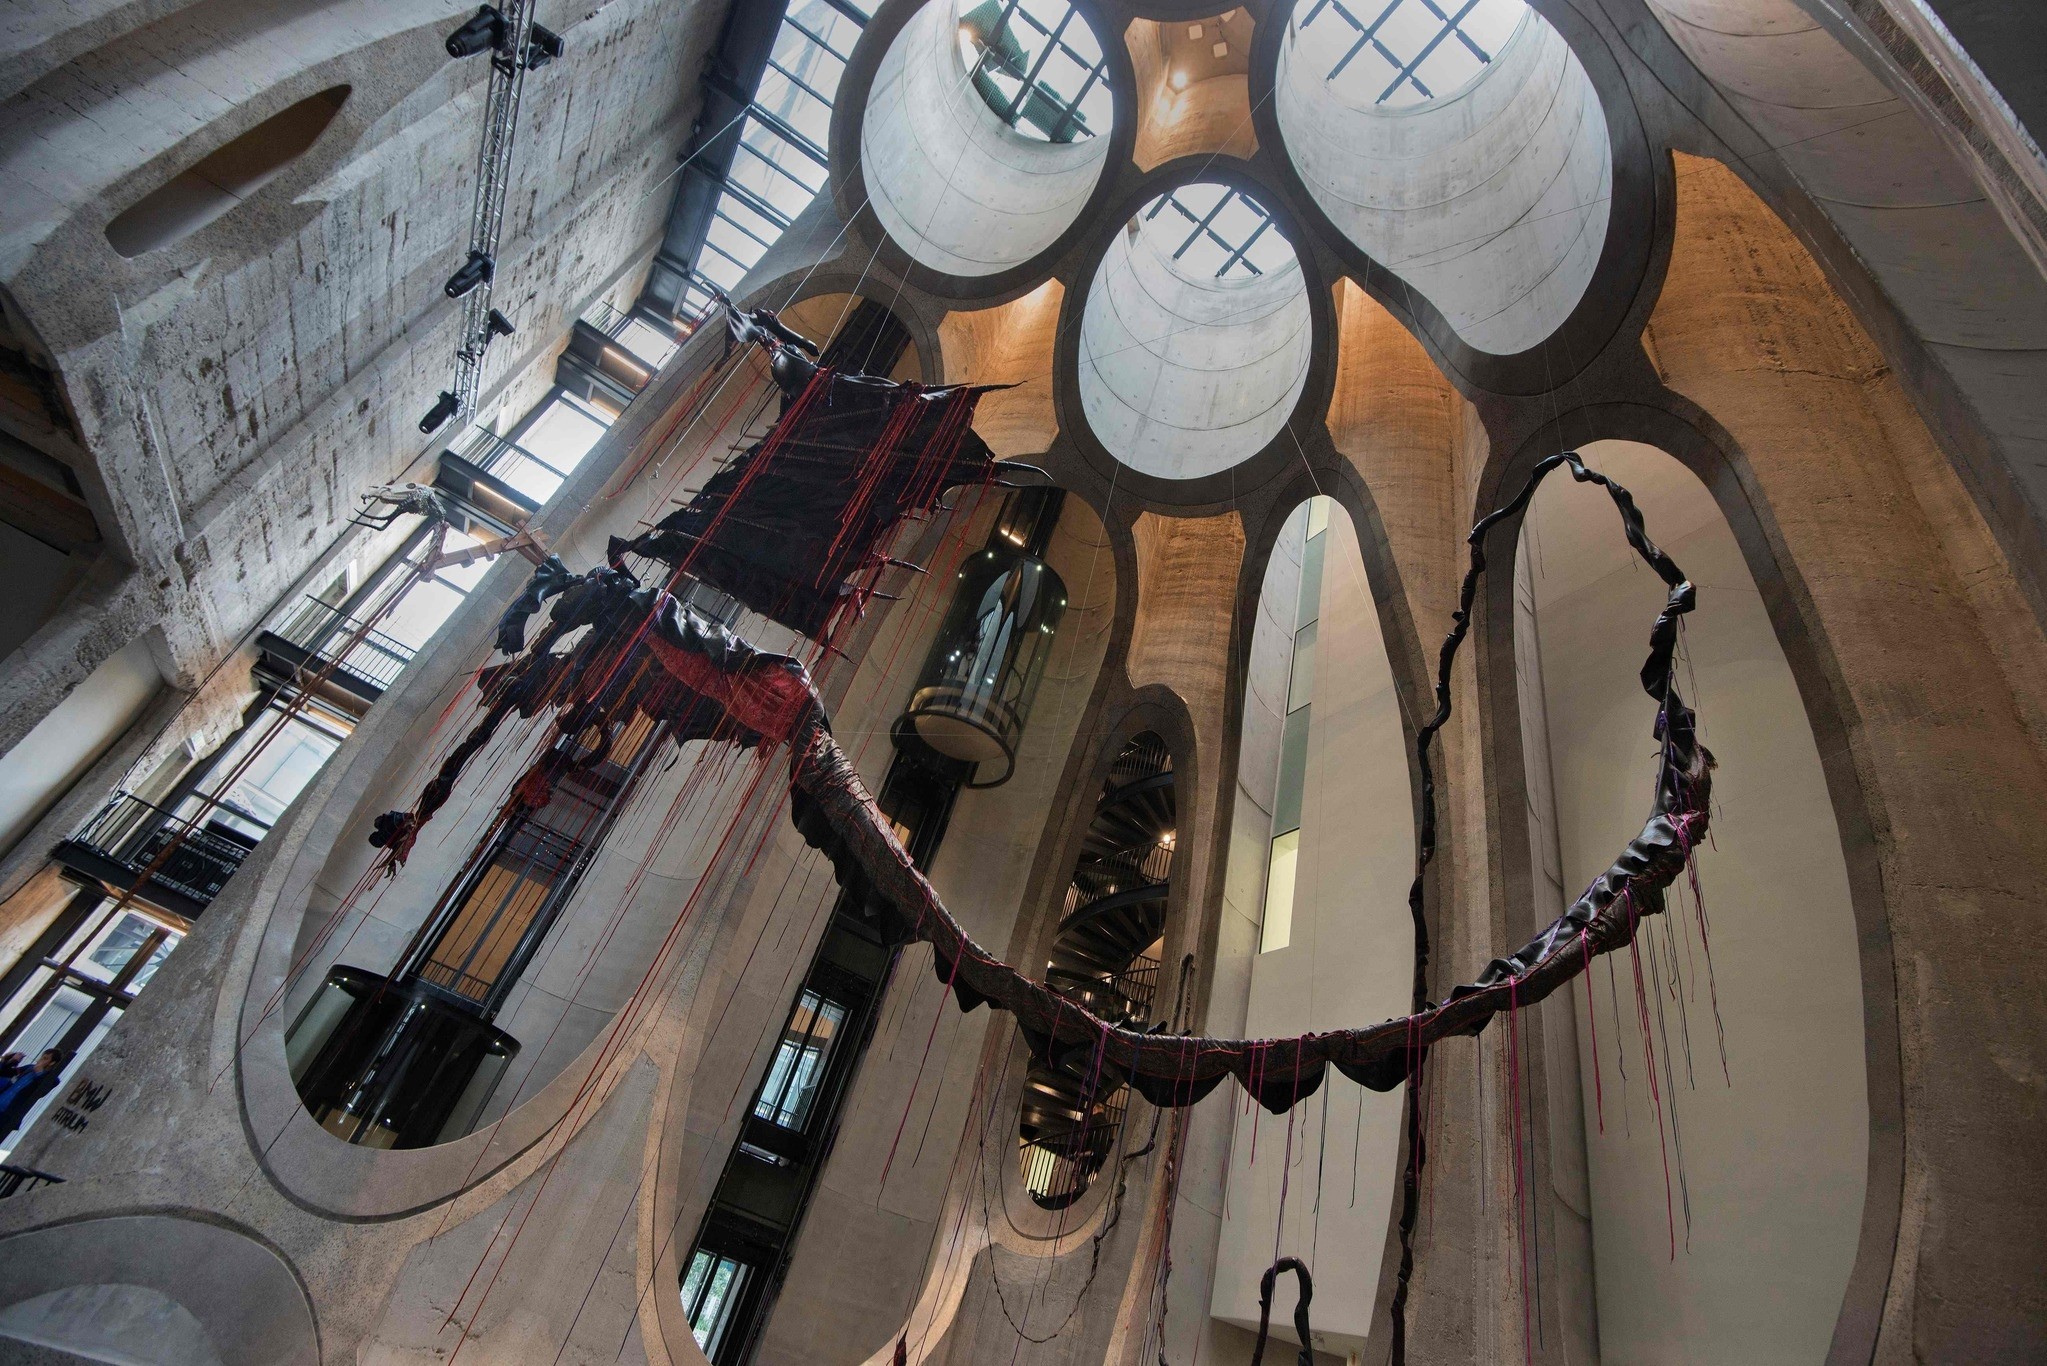 African art to blossom at Zeitz MOCAA | Daily Sabah